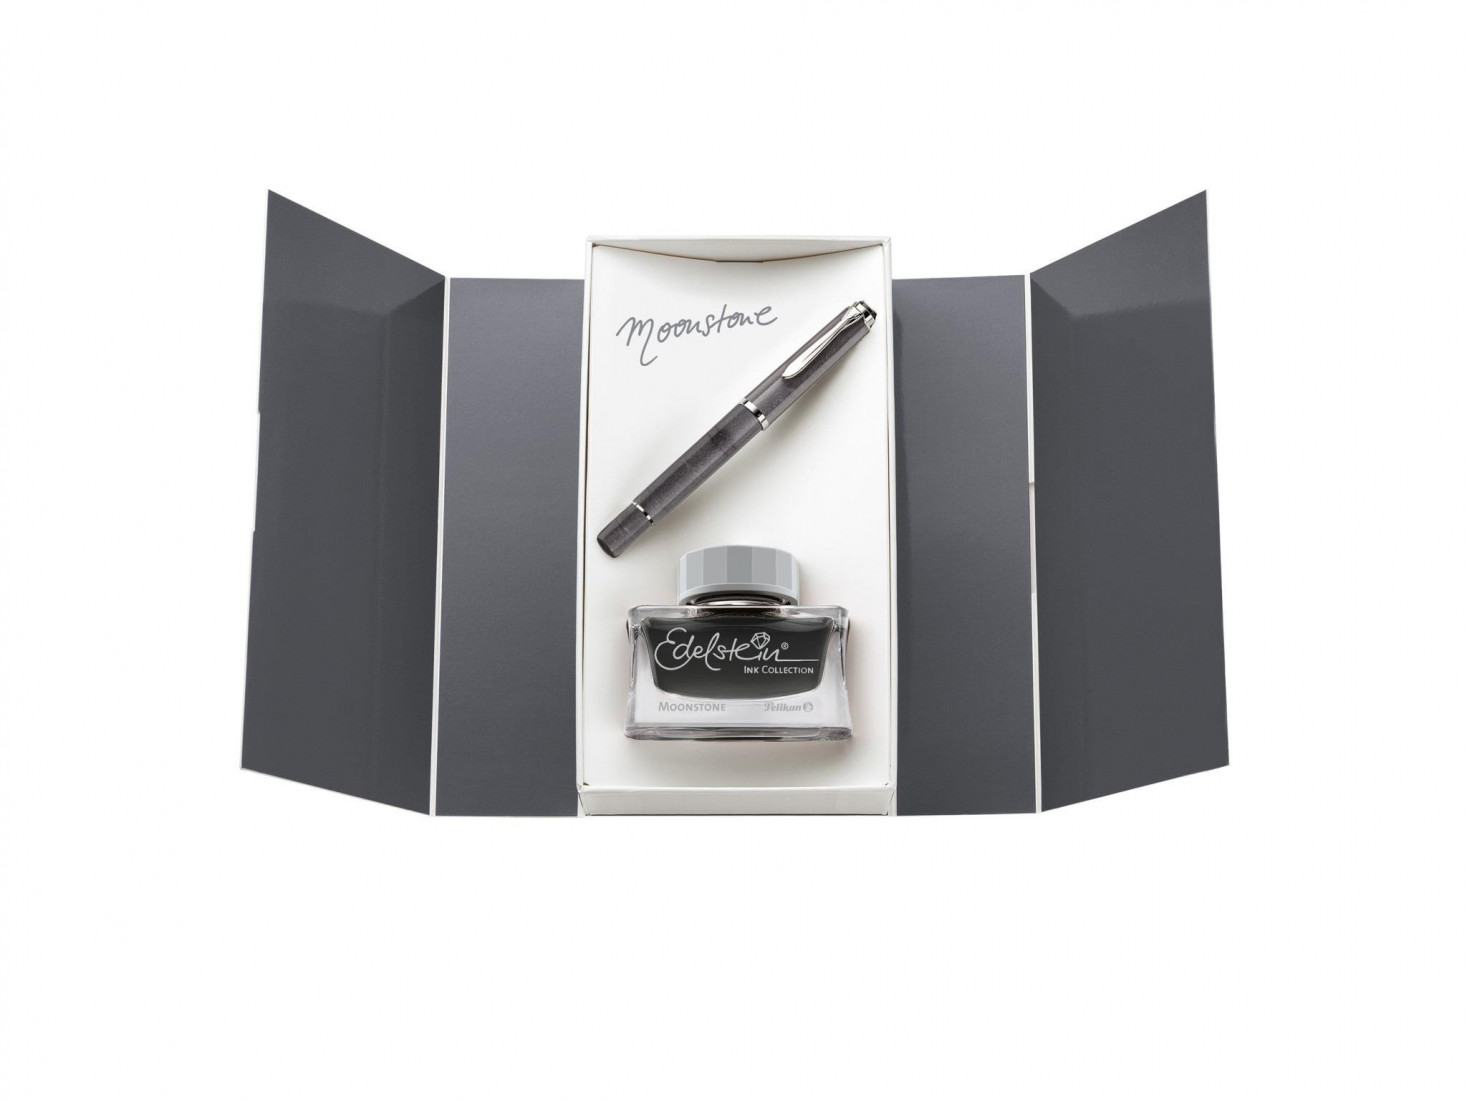 Pelikan Souveran M205 Moonstone Special Edition Fountain Pen with ink bottle